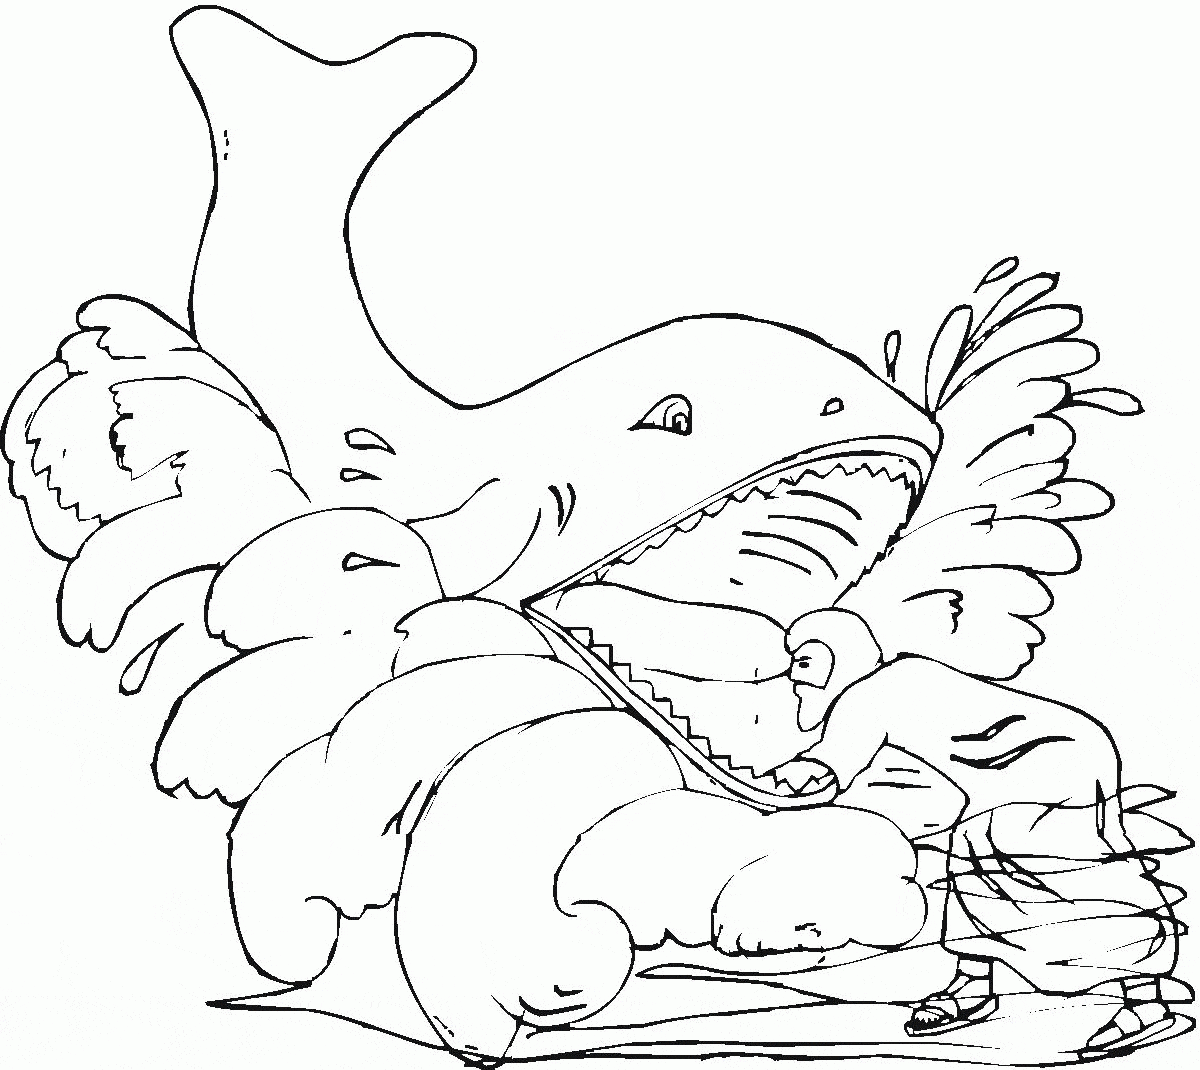 Free Printable Whale Coloring Pages For Kids